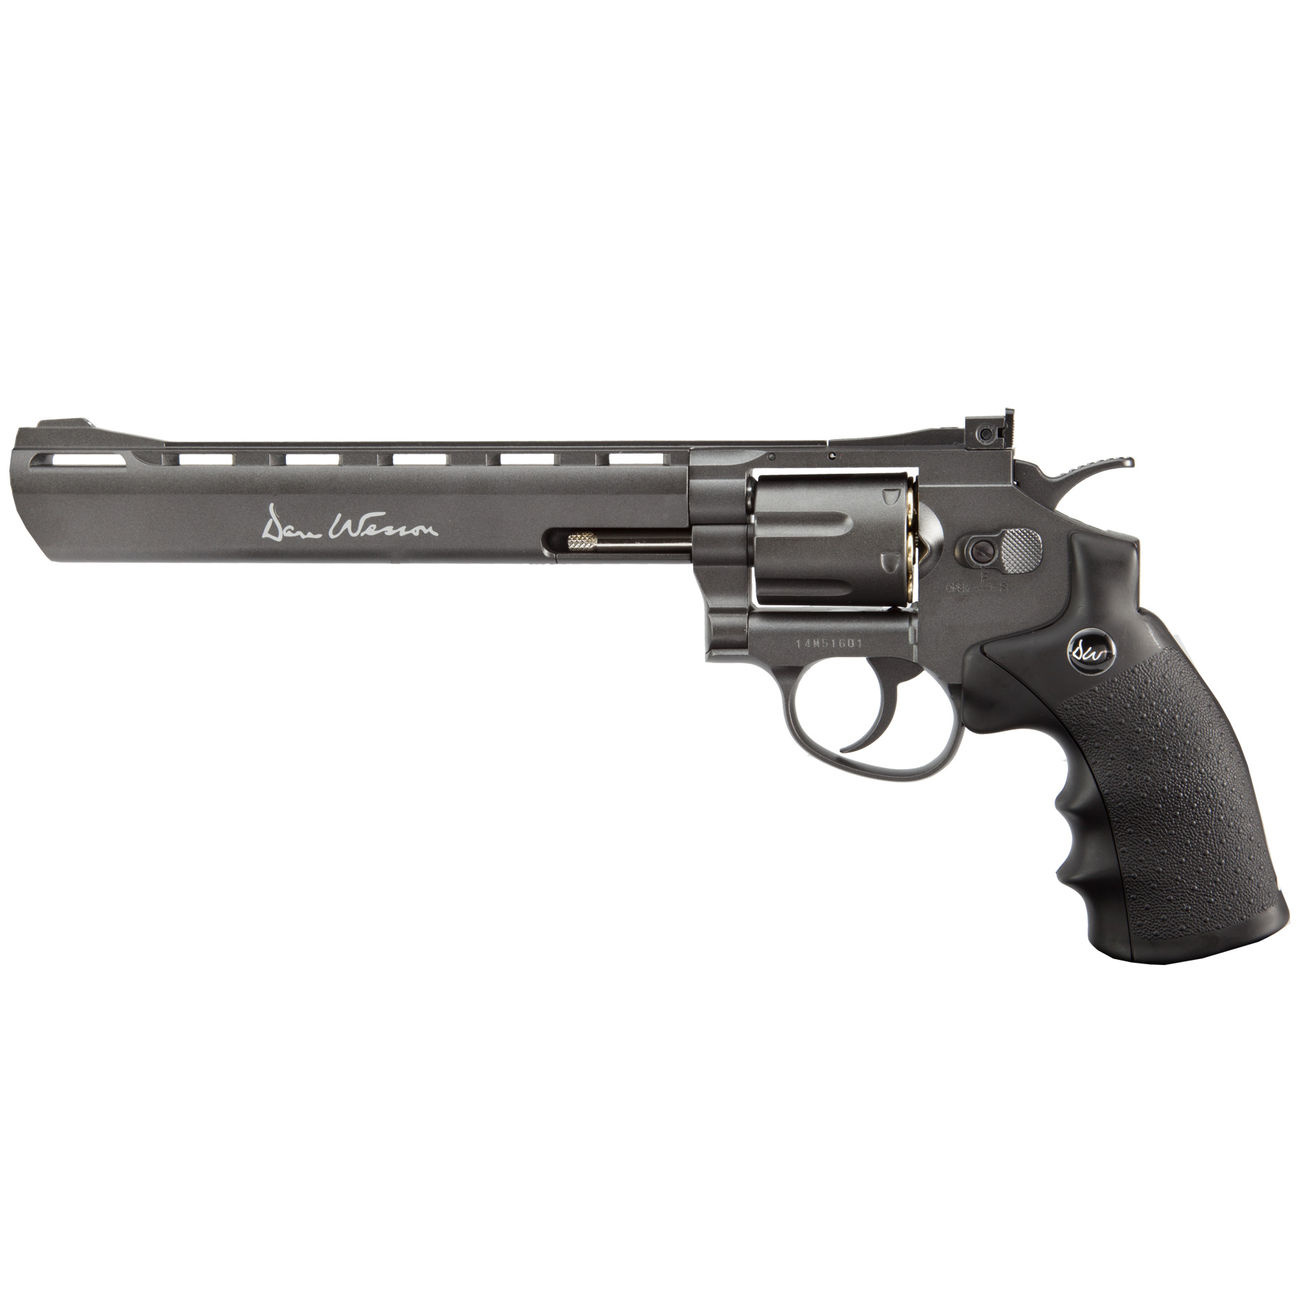 ASG 8 Zoll Dan Wesson Revolver 4,5 mm BB 3 Joule - BK